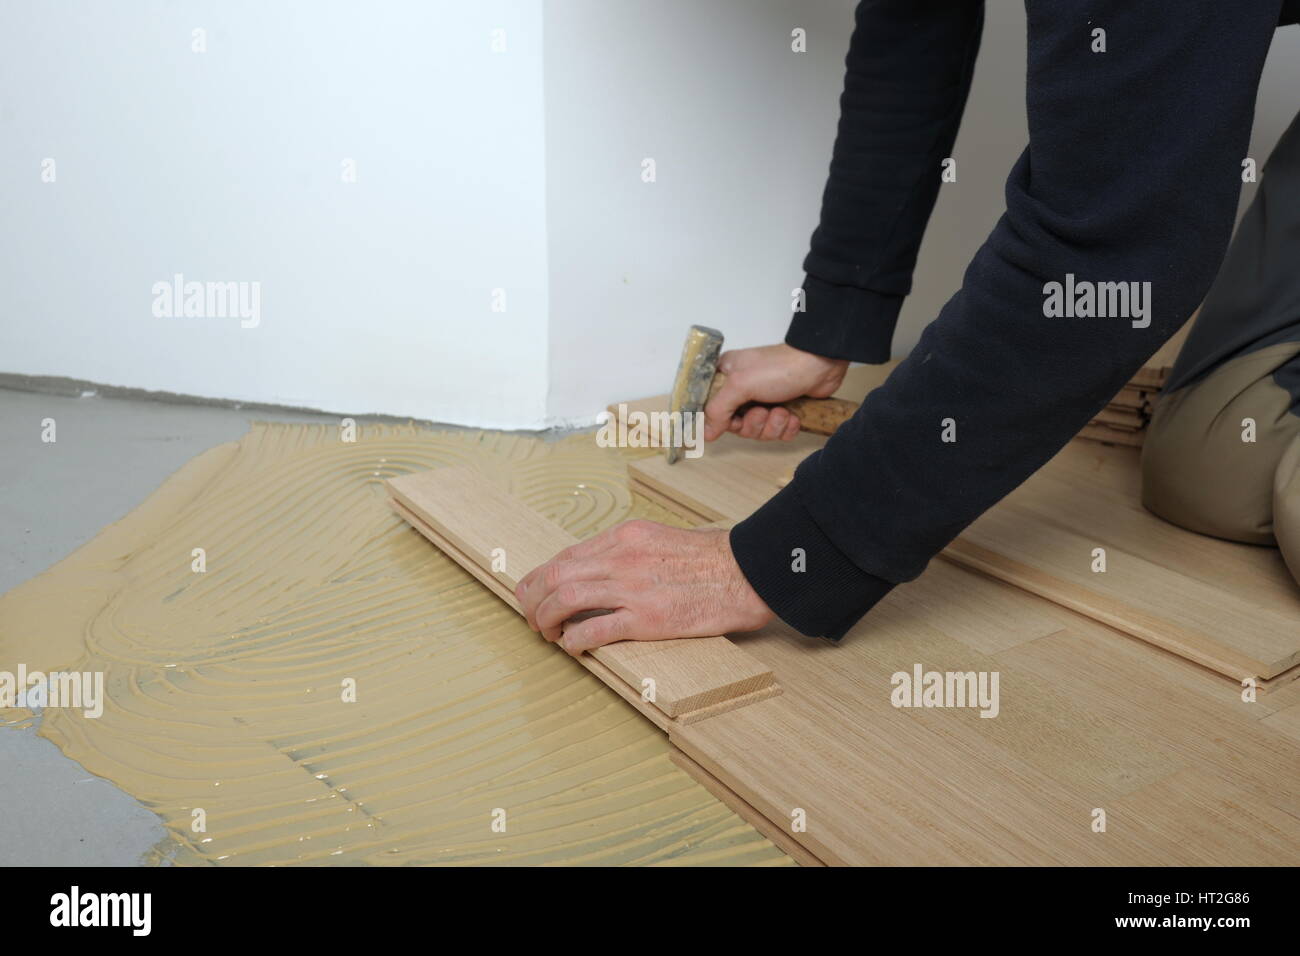 Worker Installing Wood Parquet Construction In A Renovated Room